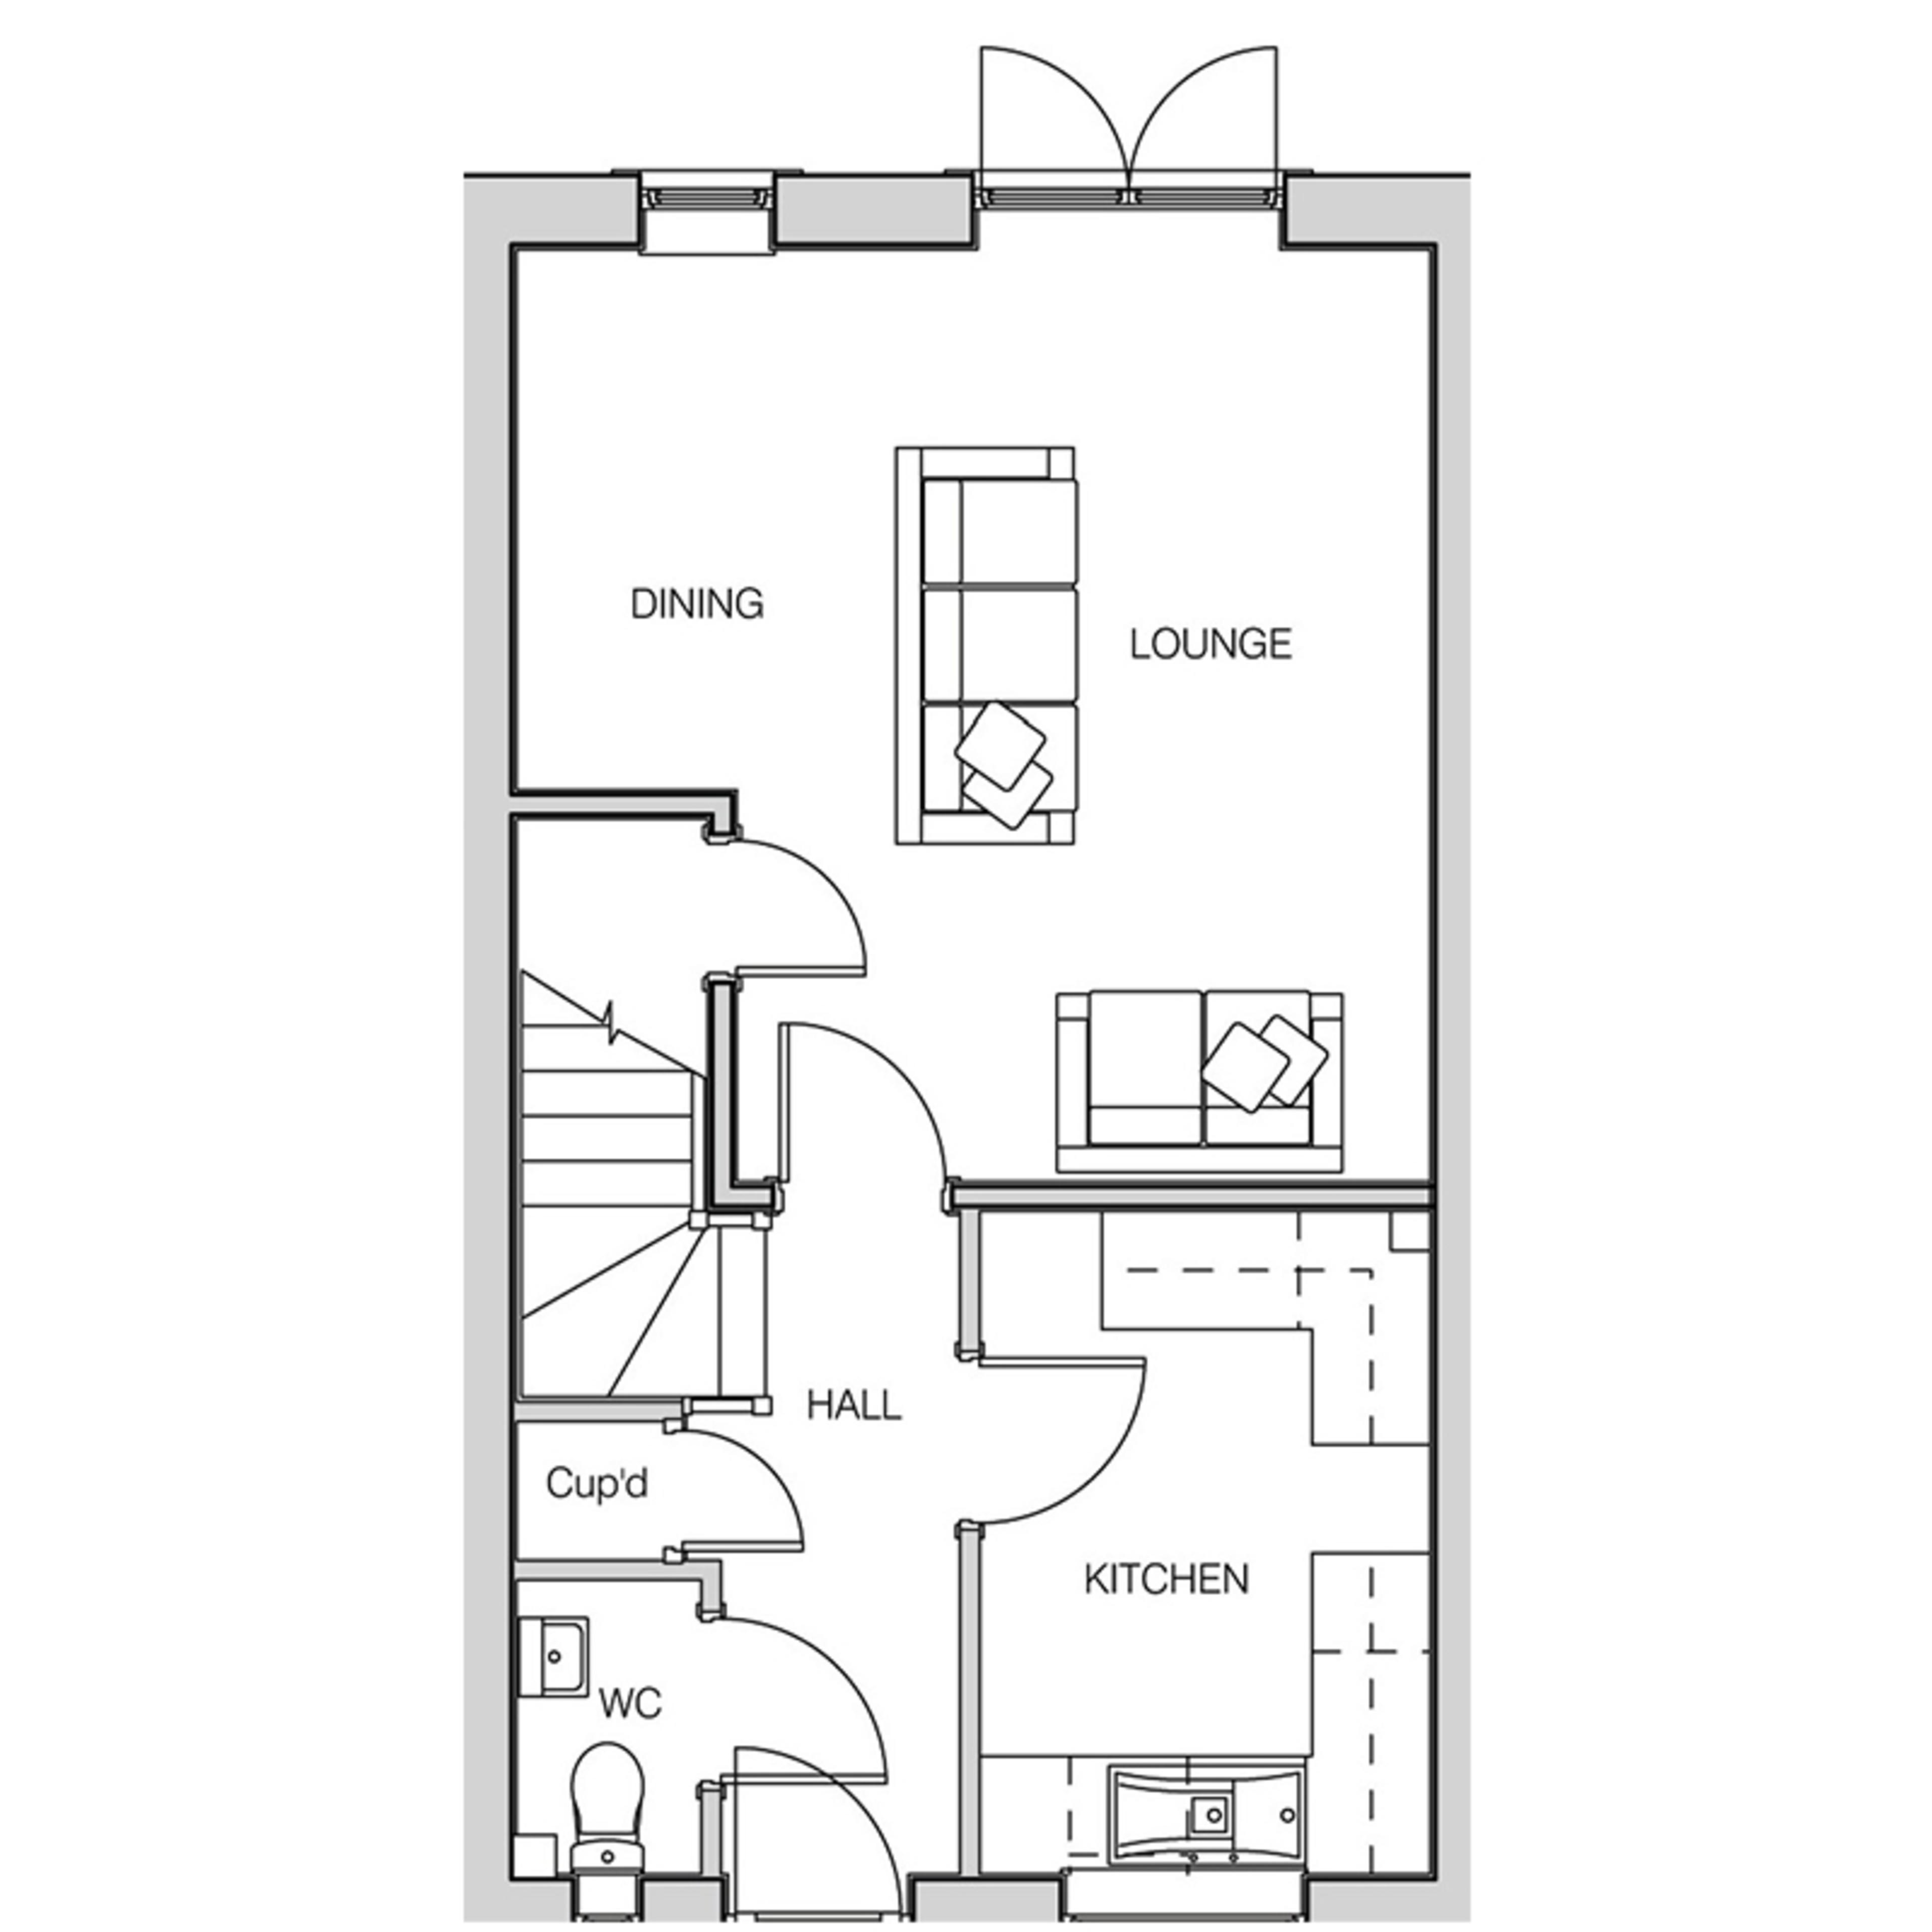 Eamont Chase - Petteril - Ground floor plan